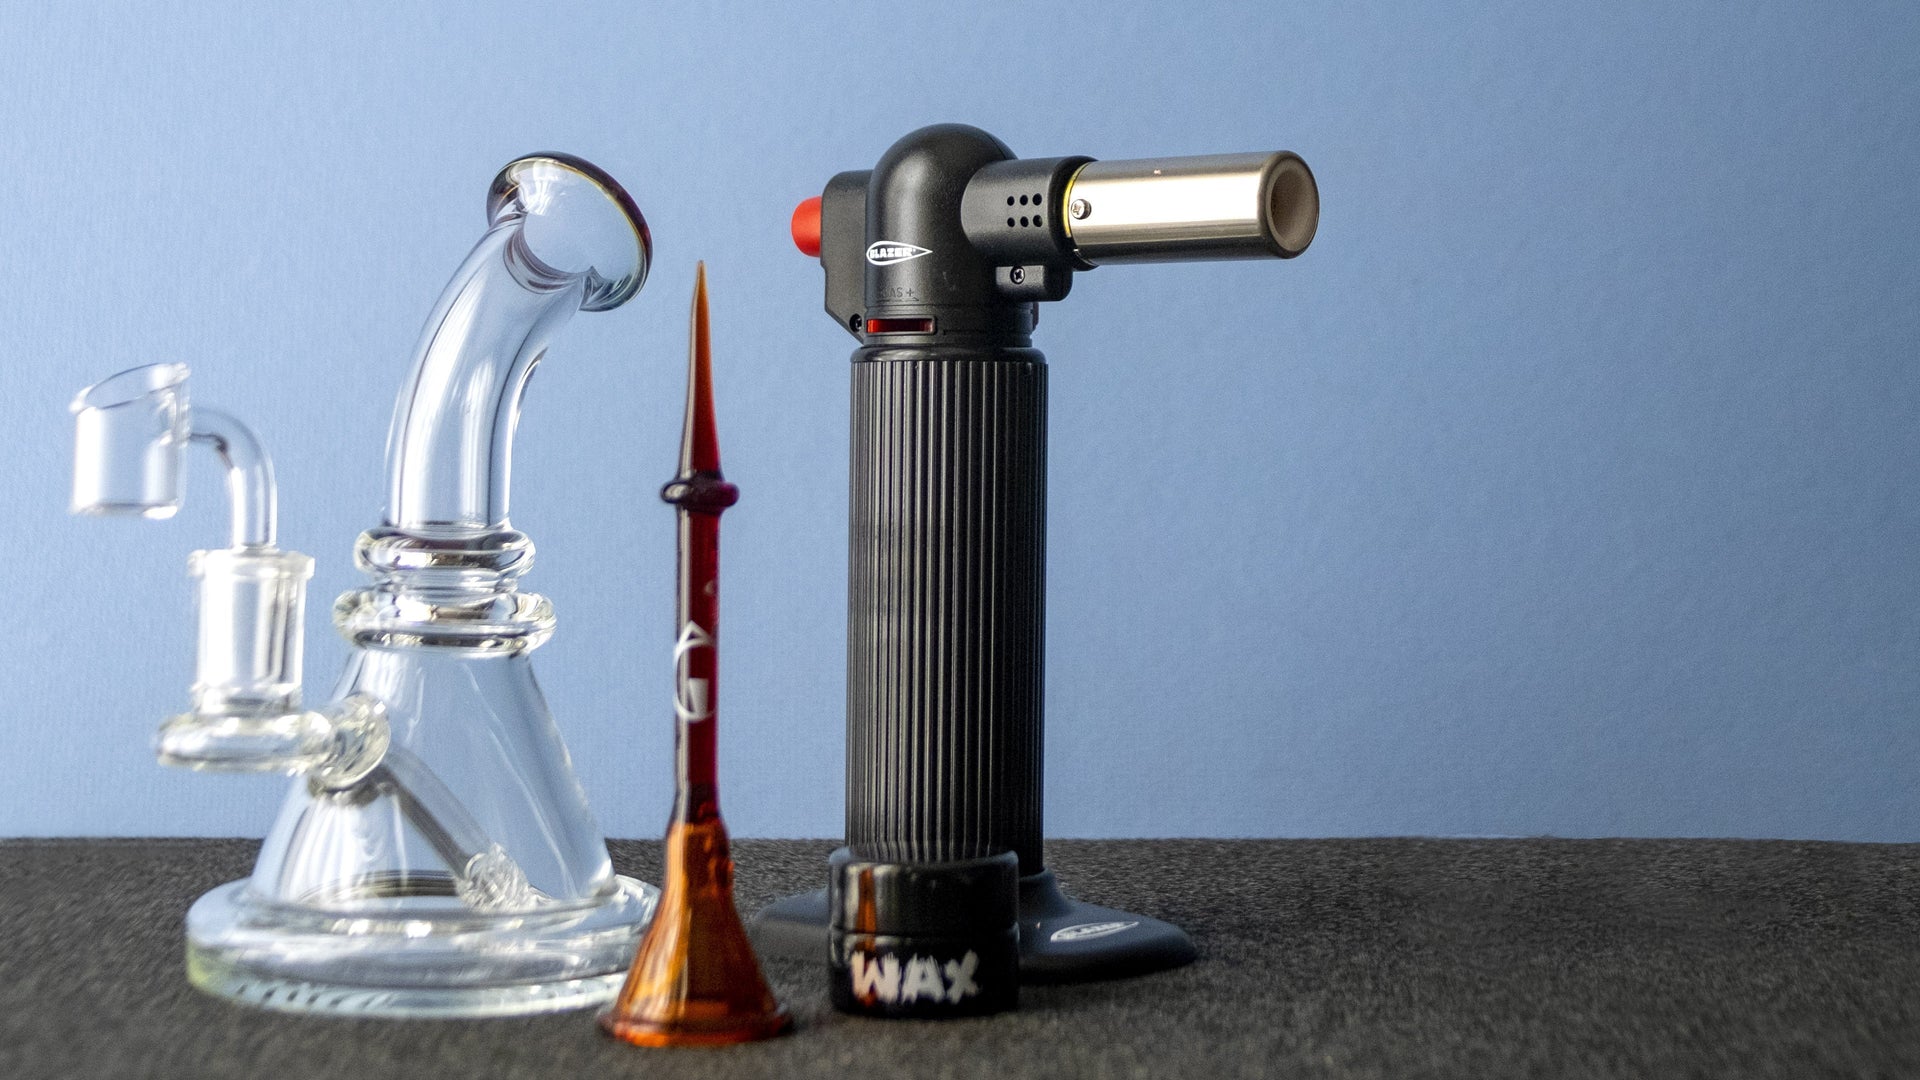 How to Dab: A Beginner's Guide to Dabs and Wax - 420 Science